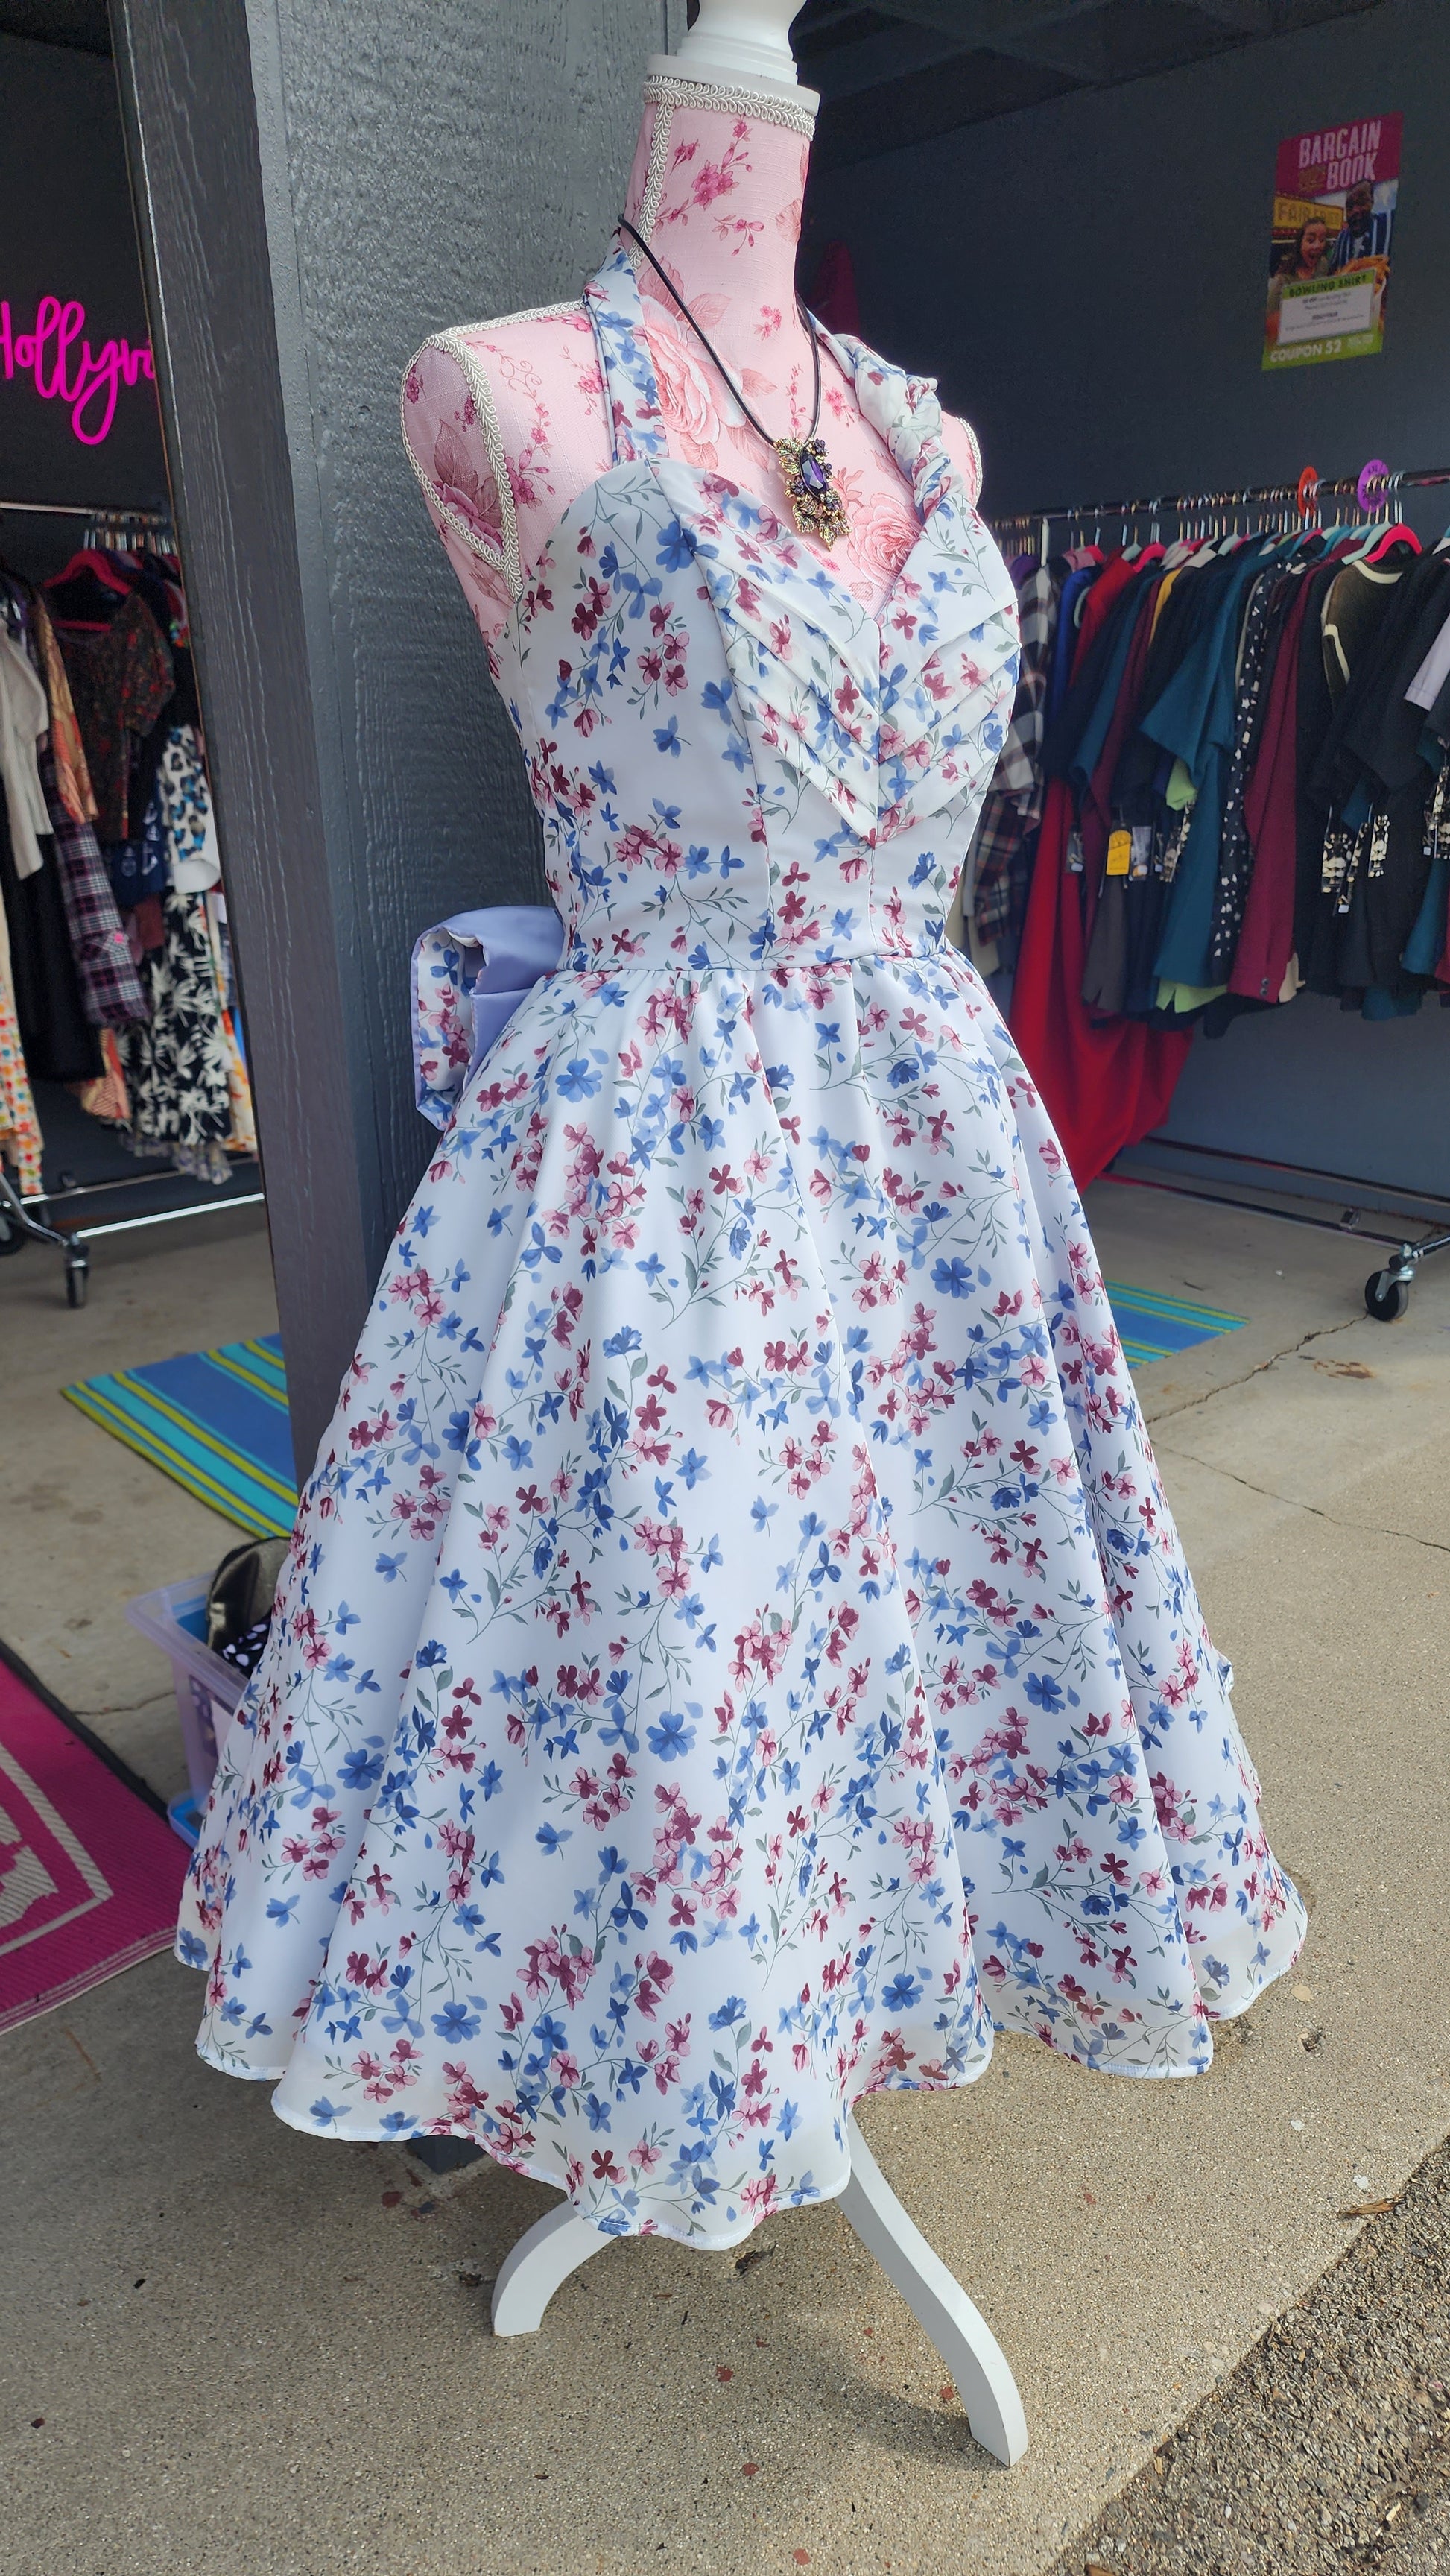 Floral Chiffon 1950's inspired dress

Pleated bodice on a chevron, fully lined and boned

Three layers of a full circle skirt with pockets